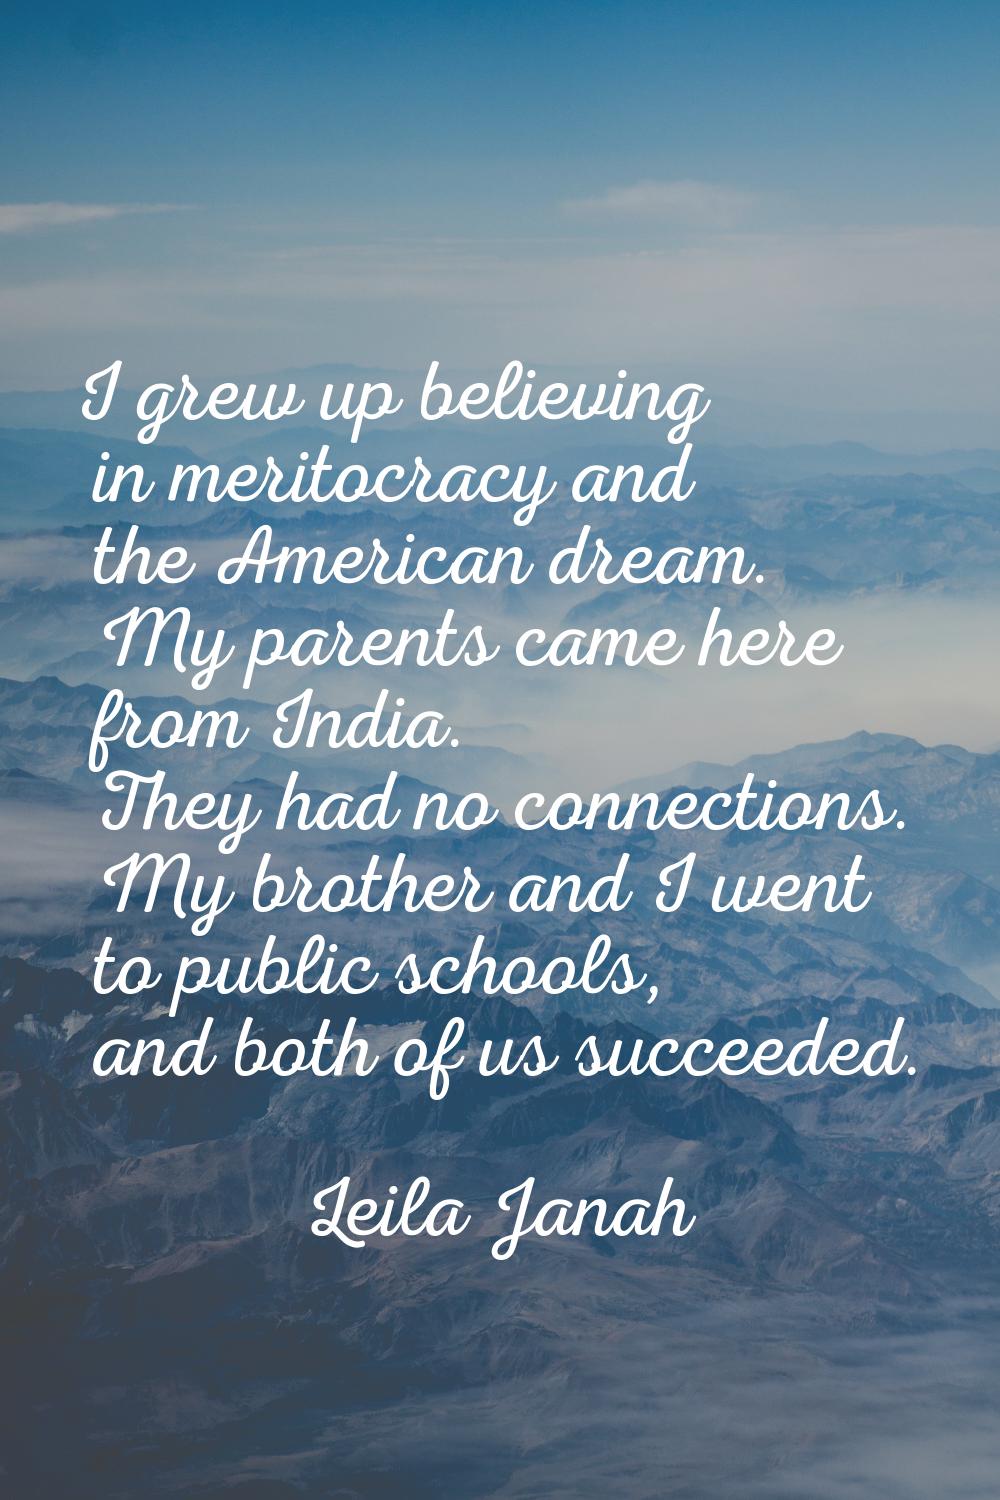 I grew up believing in meritocracy and the American dream. My parents came here from India. They ha